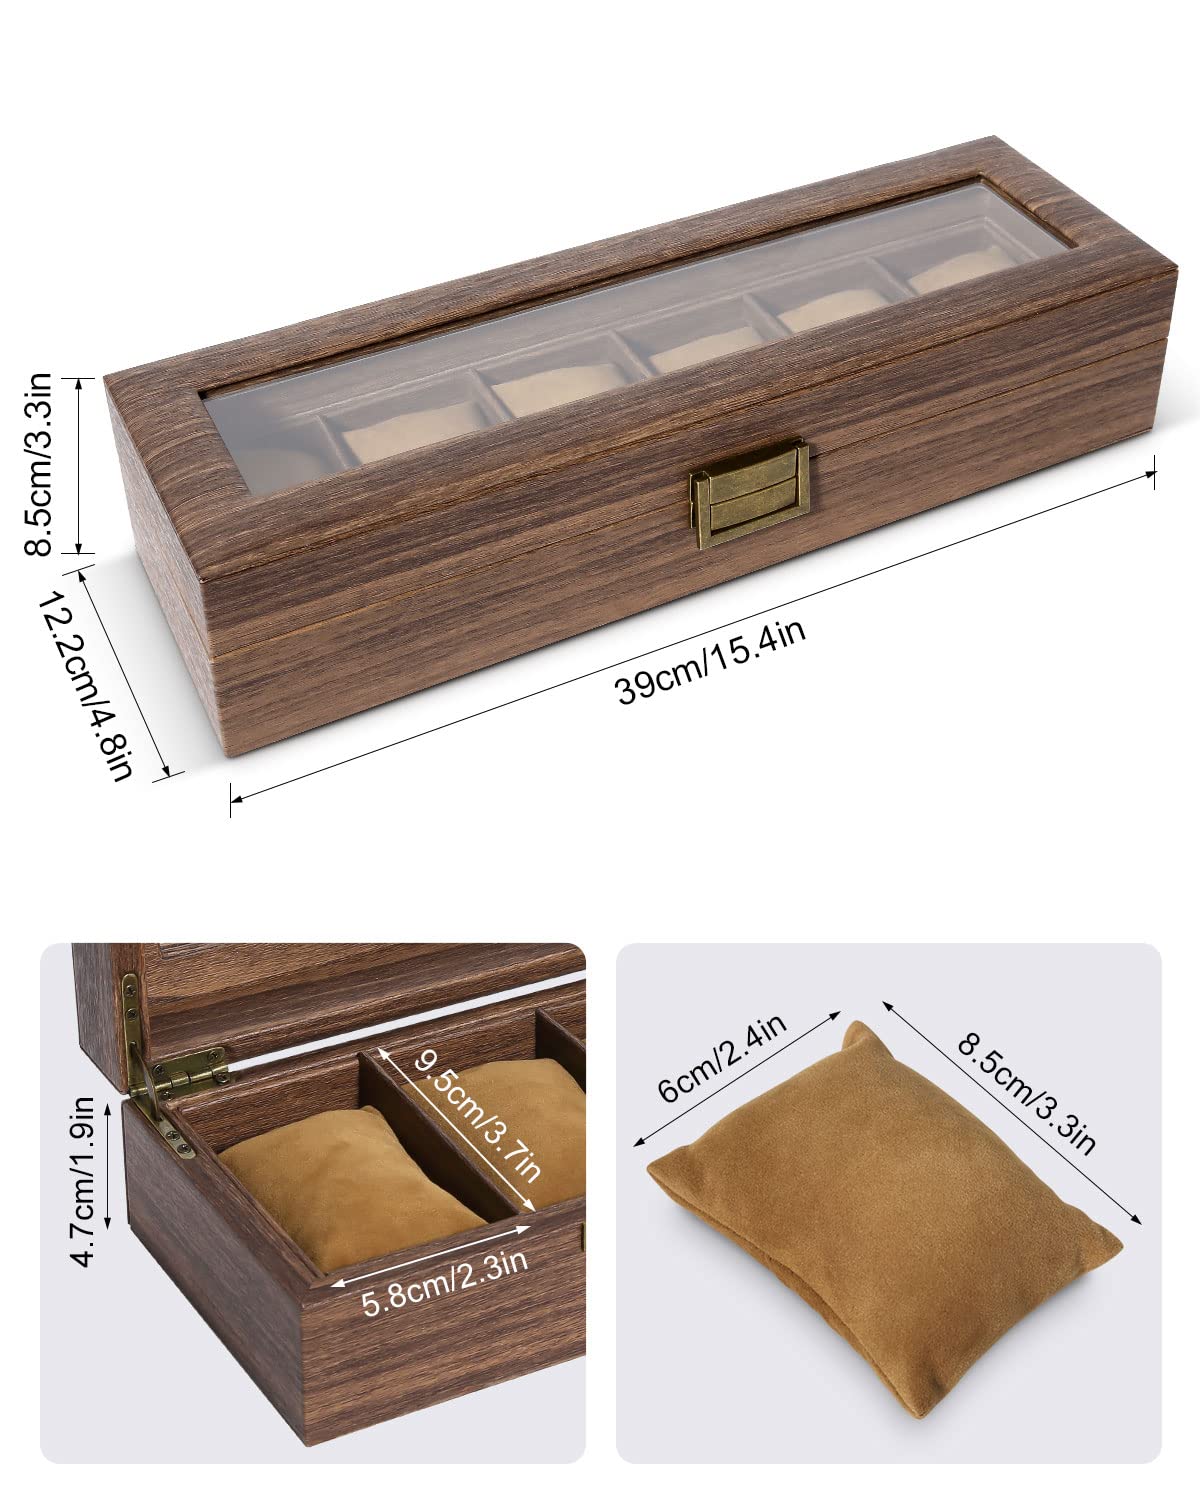 Uten Watch Box with 6 Slots, Watch Case Organizer with Real Glass Lid, Wood Grain PU Leather Watch Display Storage Box with Removable Imitation Suede Watch Pillows, Metal Clasp, Gift for Men and Women